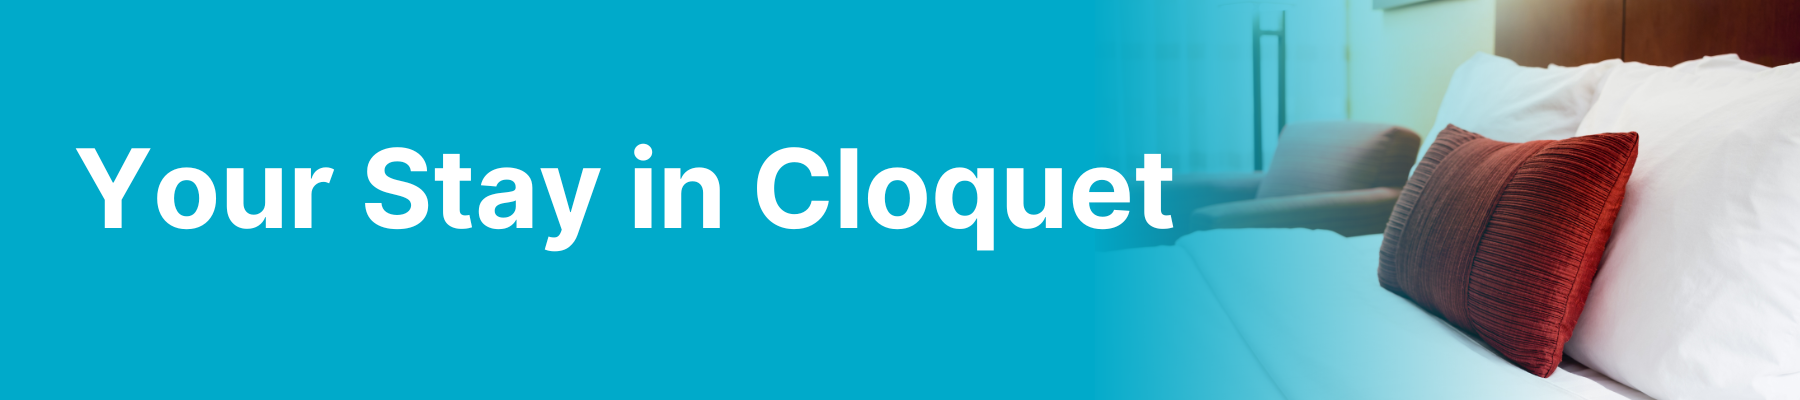 Your Stay in Cloquet at the Cloquet Hospital